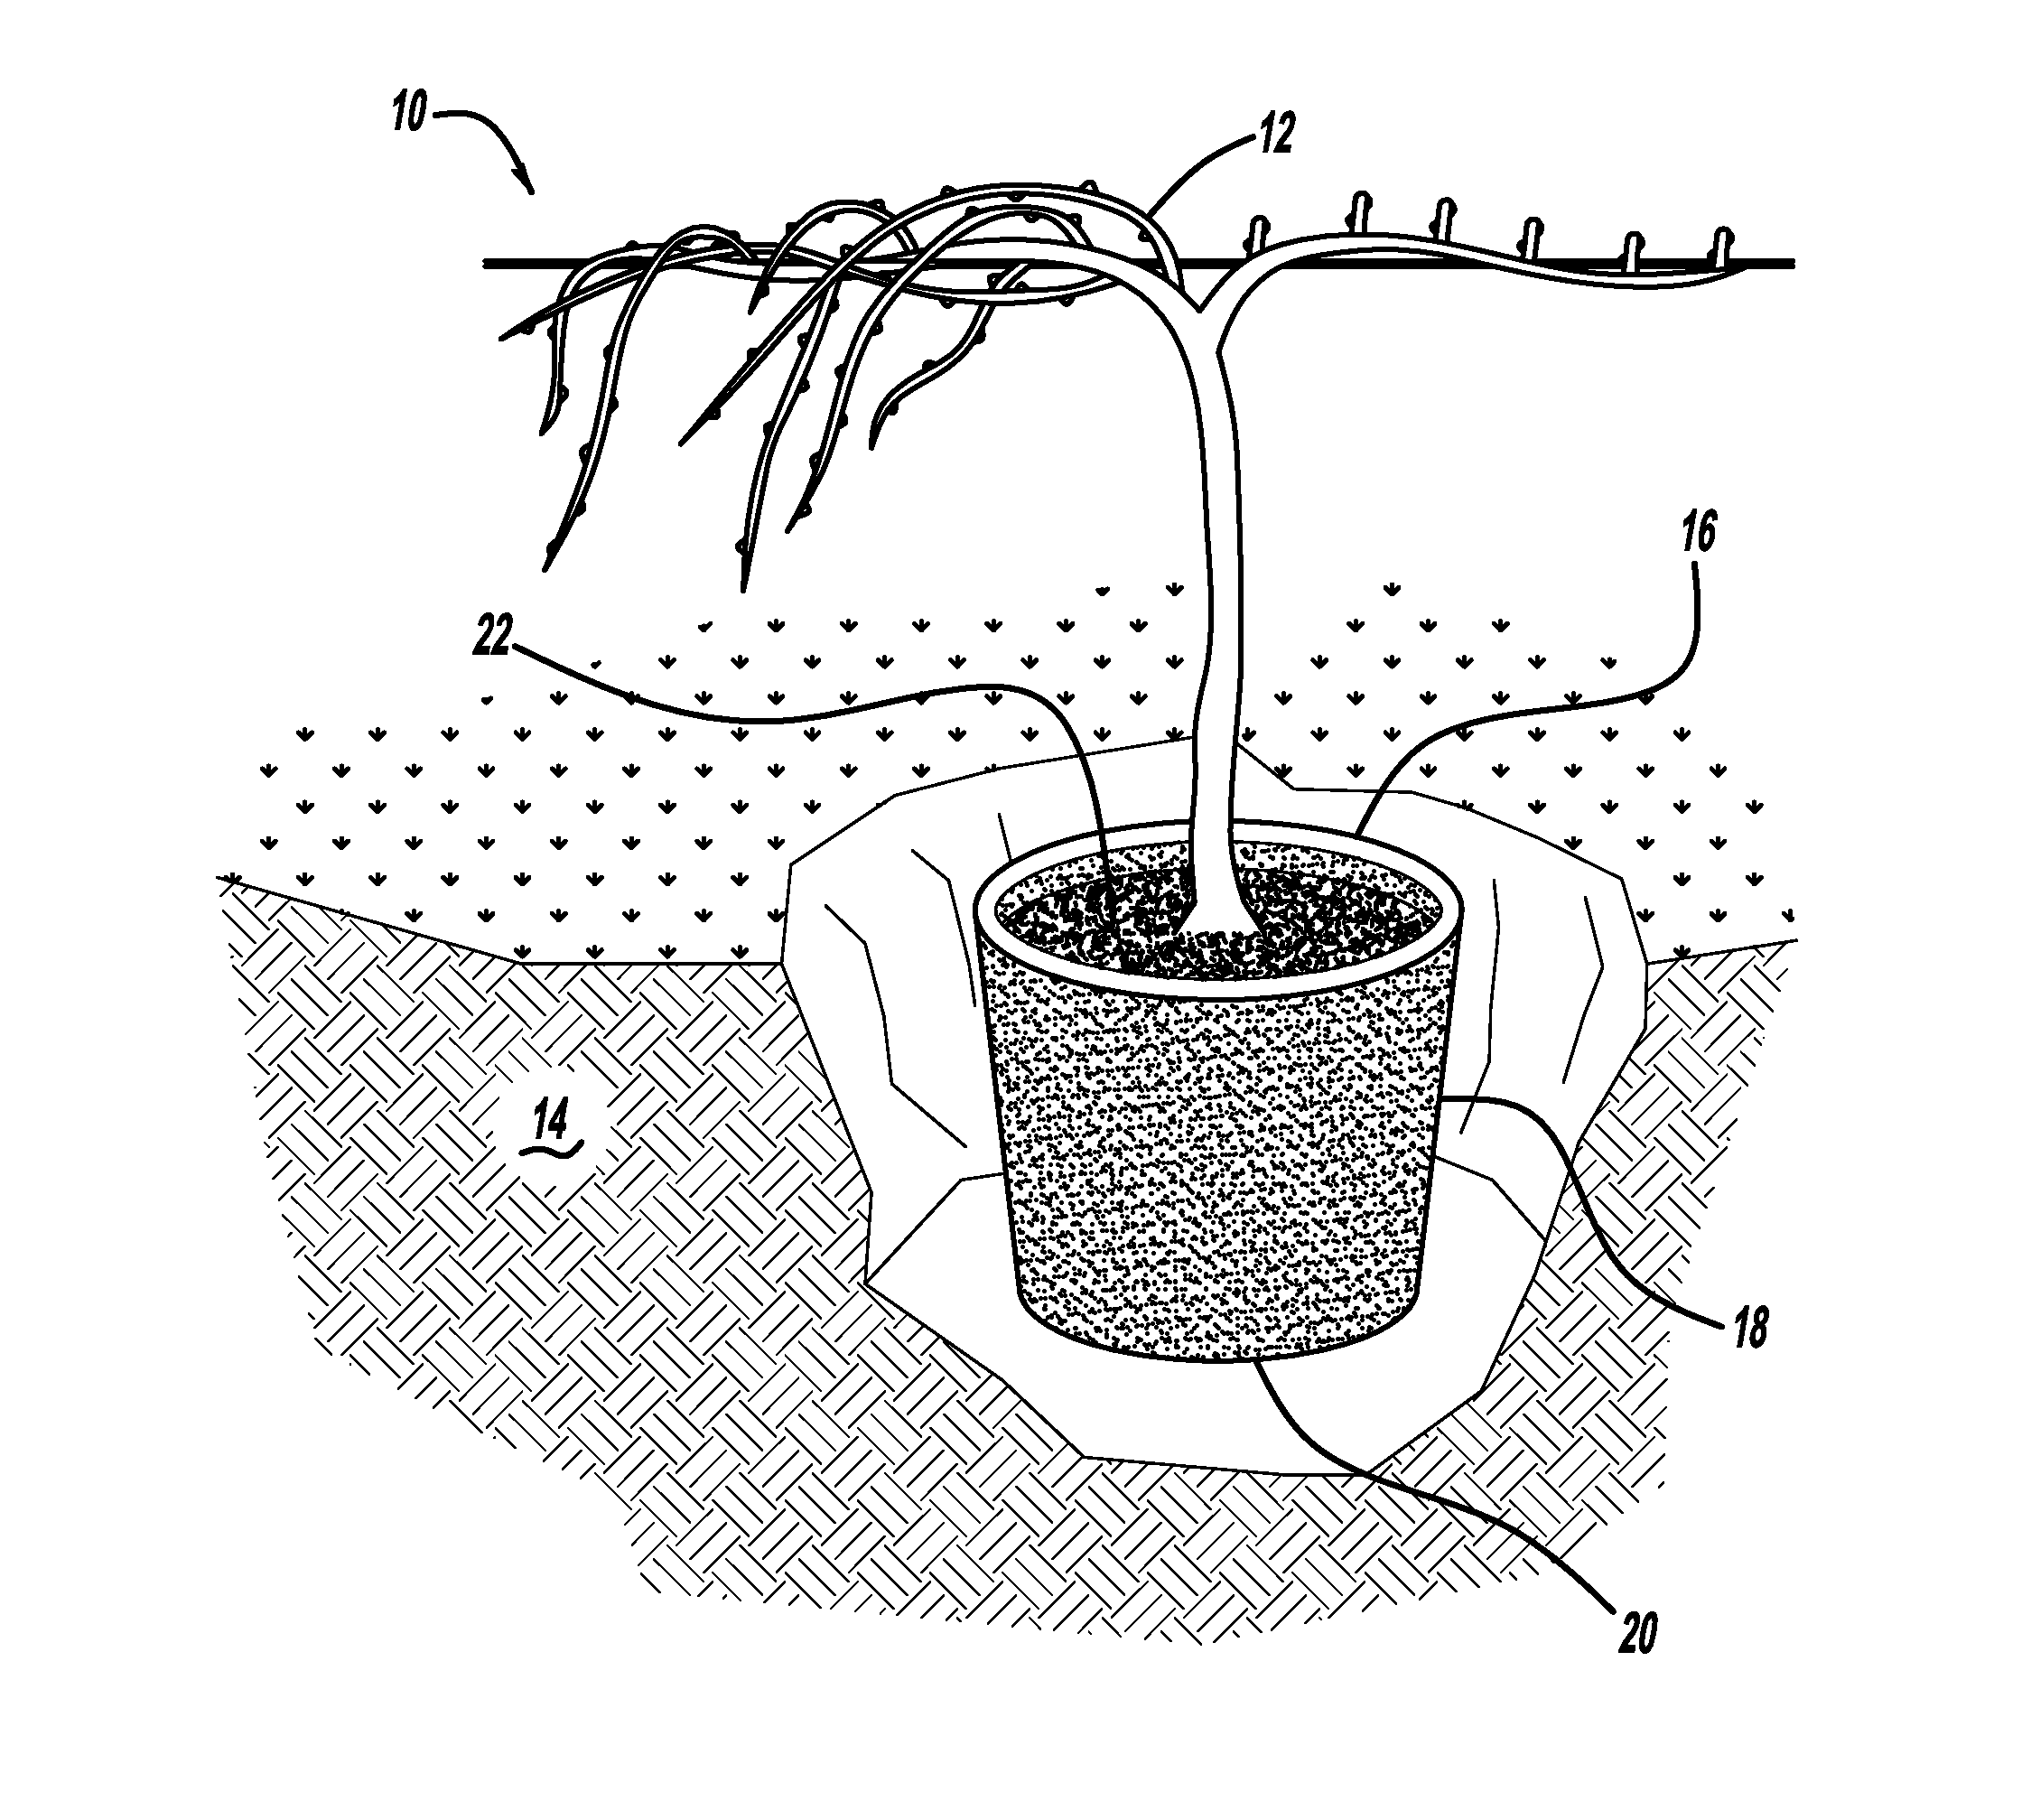 Method of Growing Grapevines